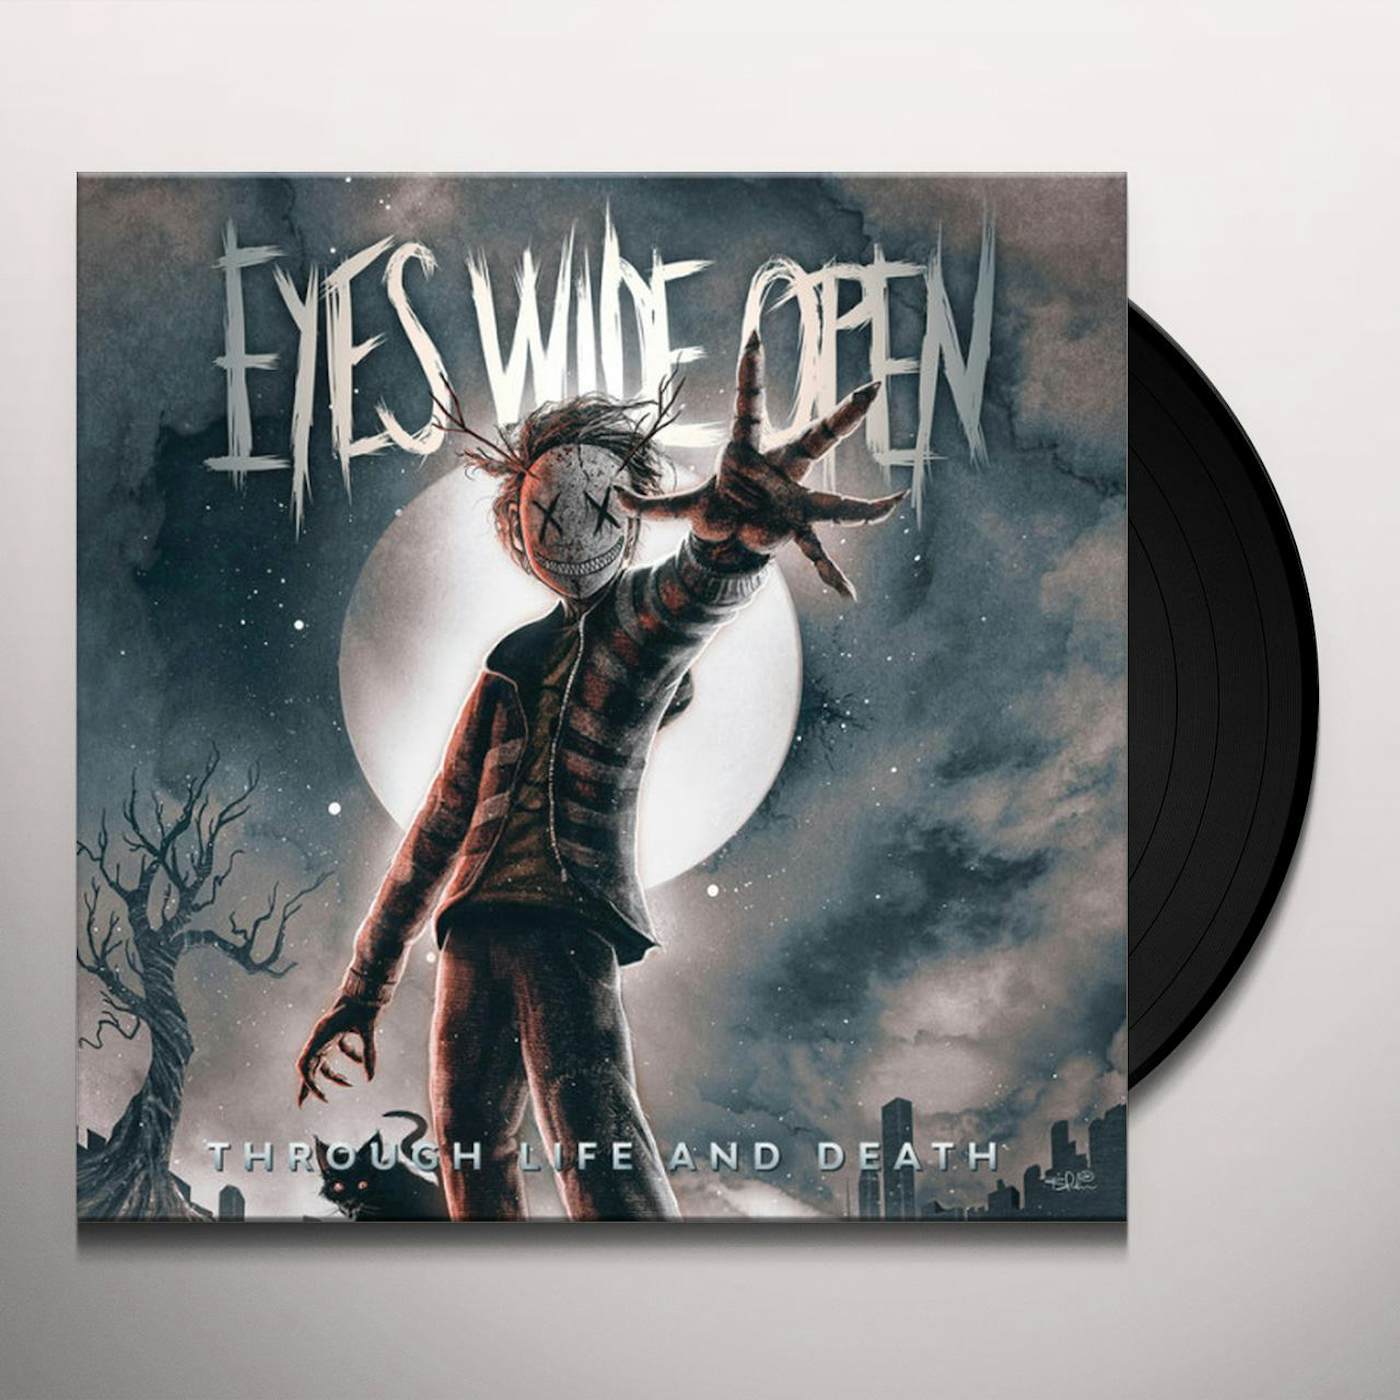 Eyes Wide Open Through Life and Death Vinyl Record